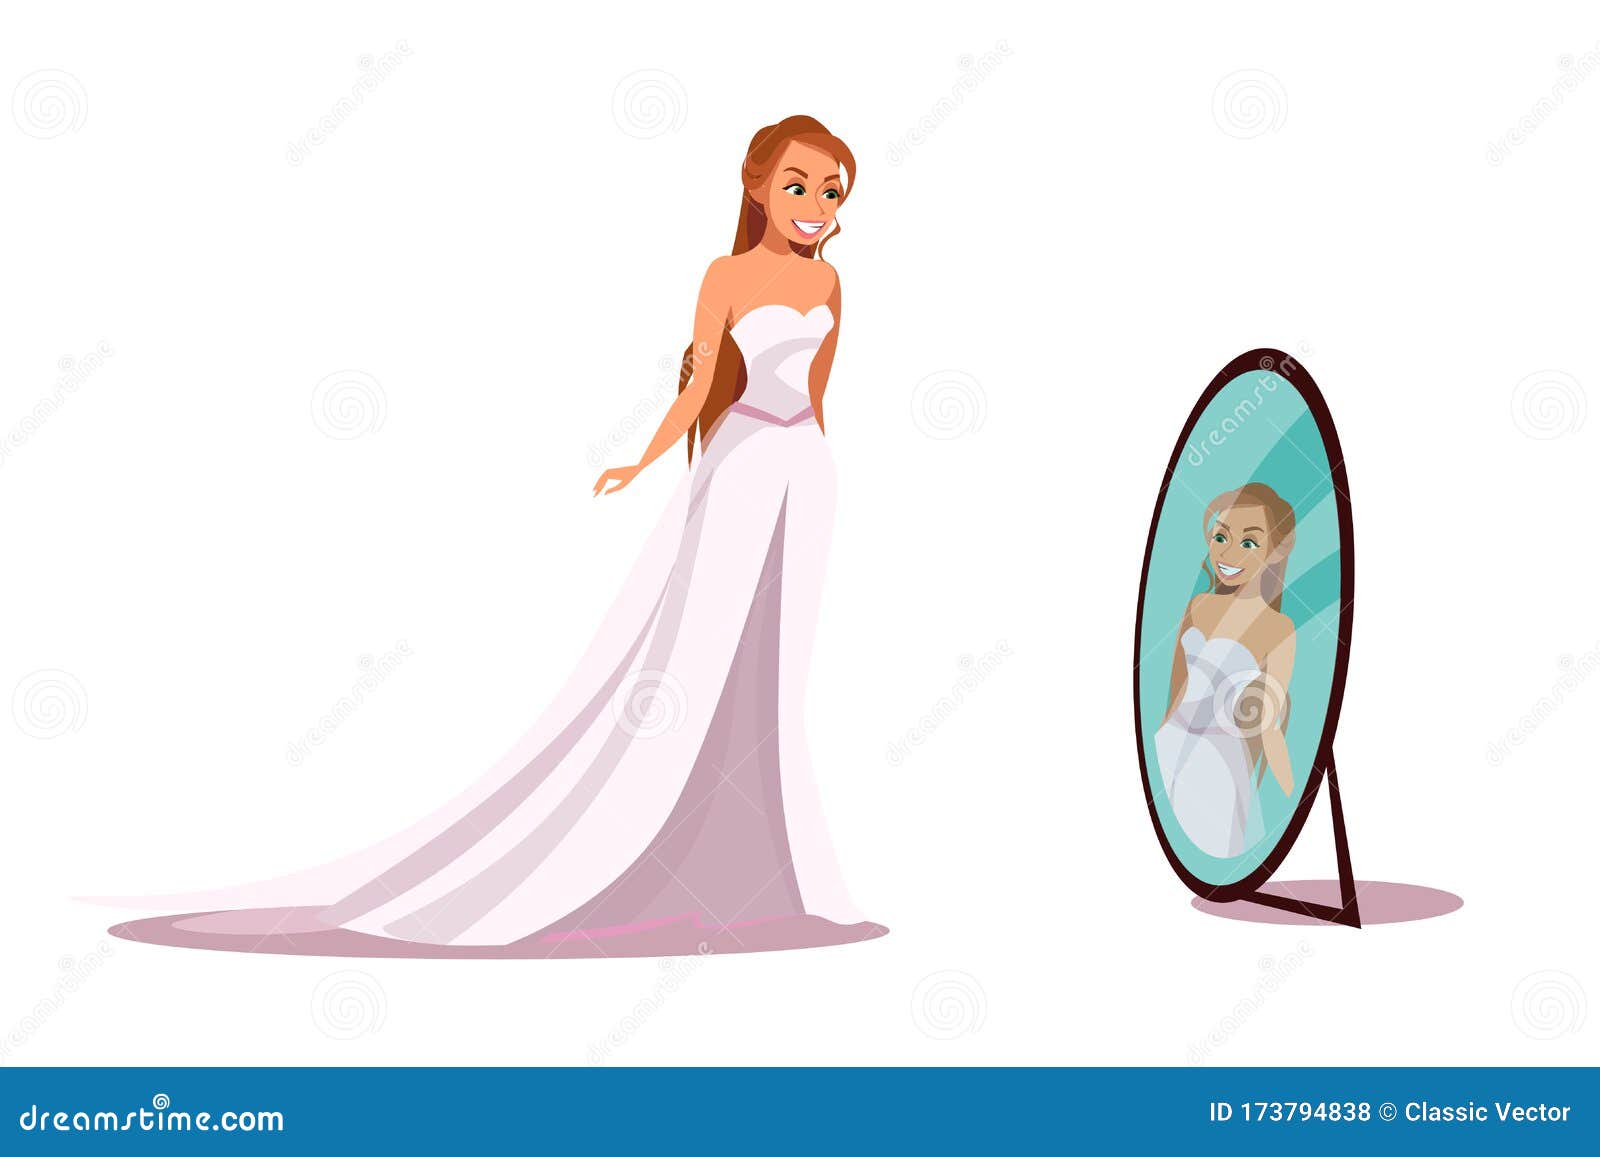 Woman Trying on Clothes Flat Vector Illustration Stock Vector ...